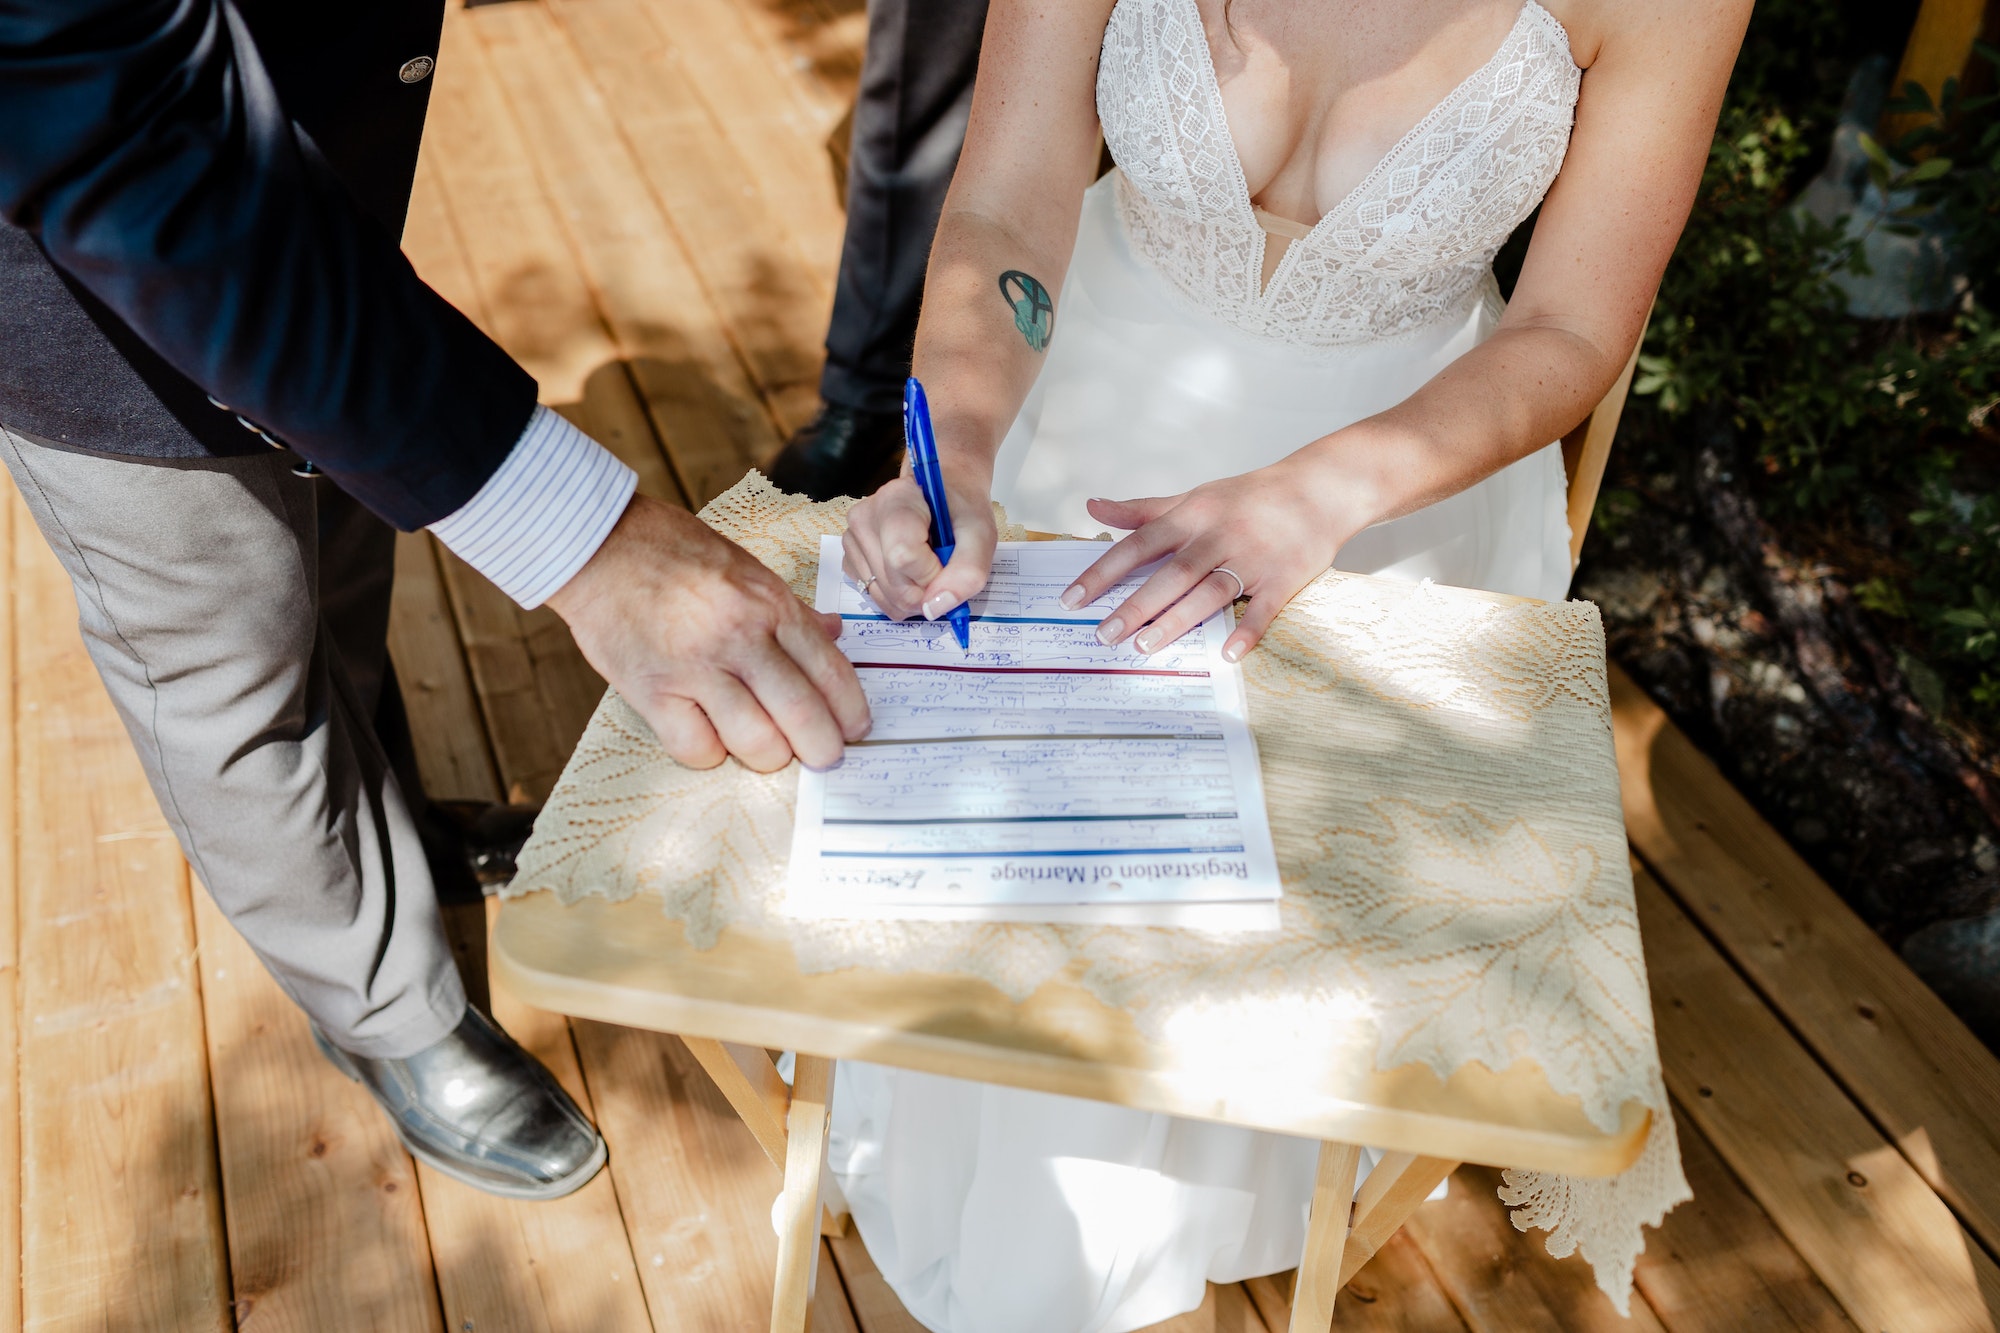 Closeup shot of a bride signing a wedding contract papers on a wooden table on a sunny day